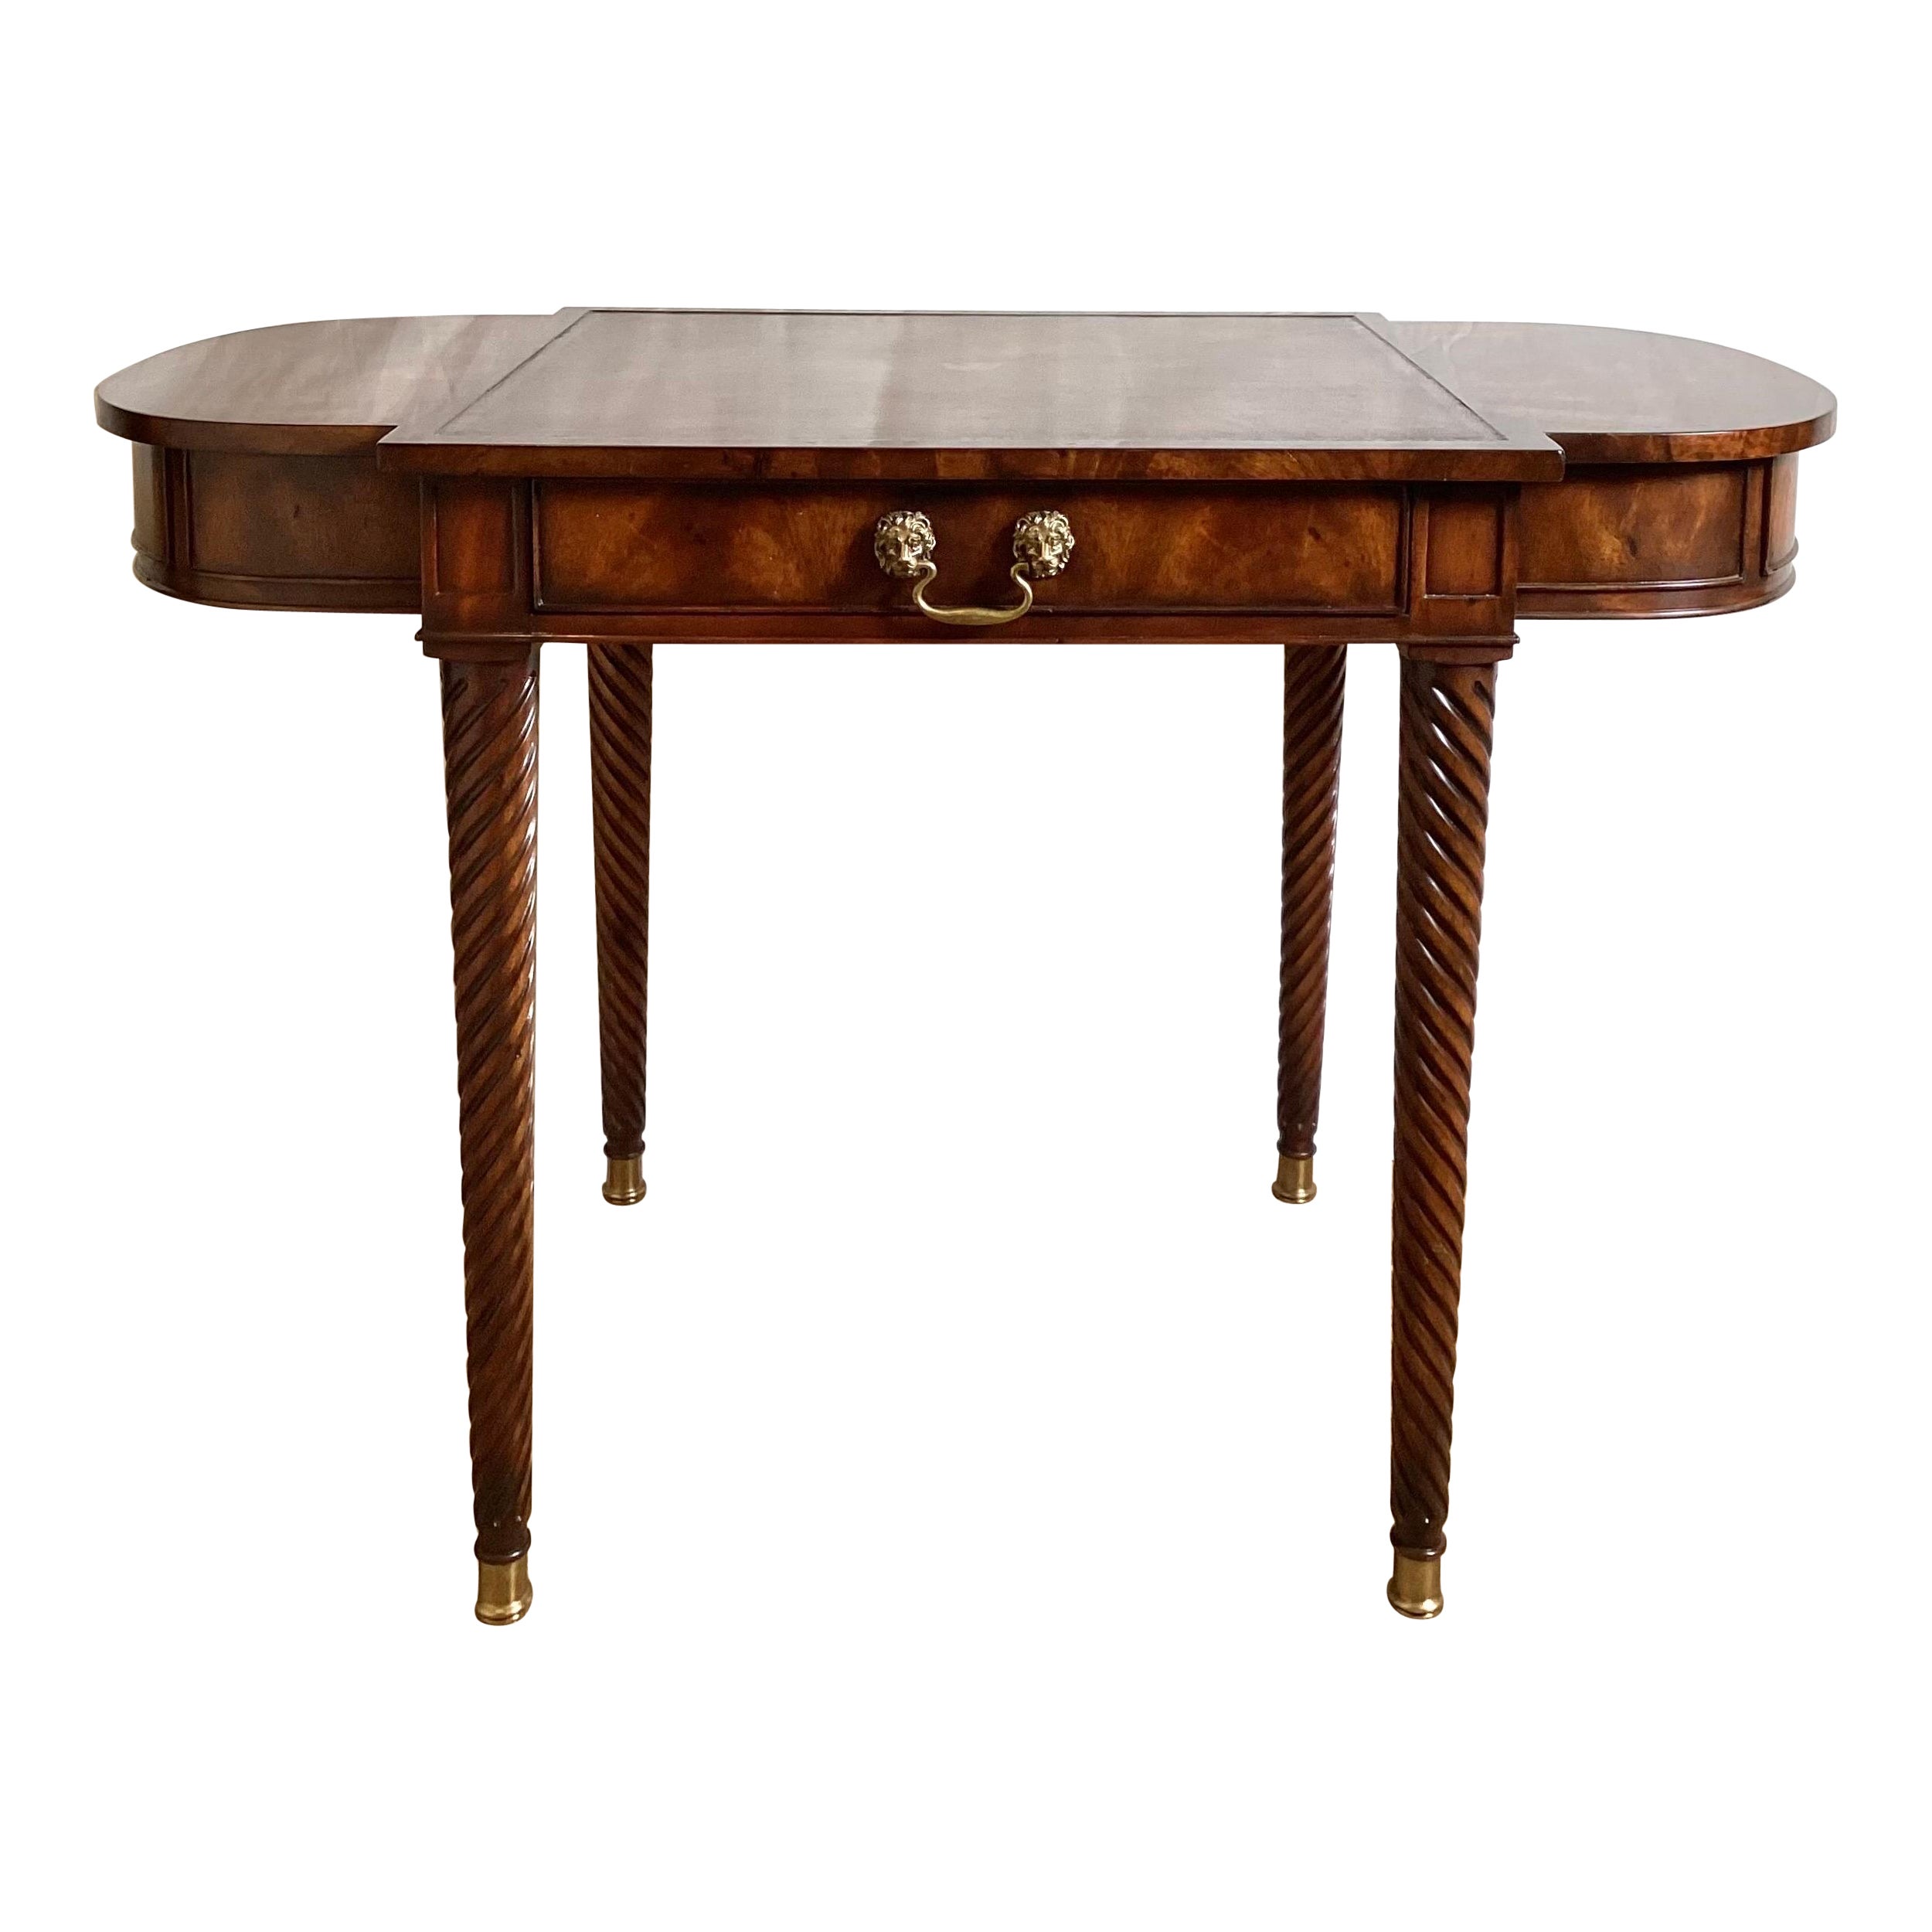 English Regency Style Writing Table by Theodore Alexander